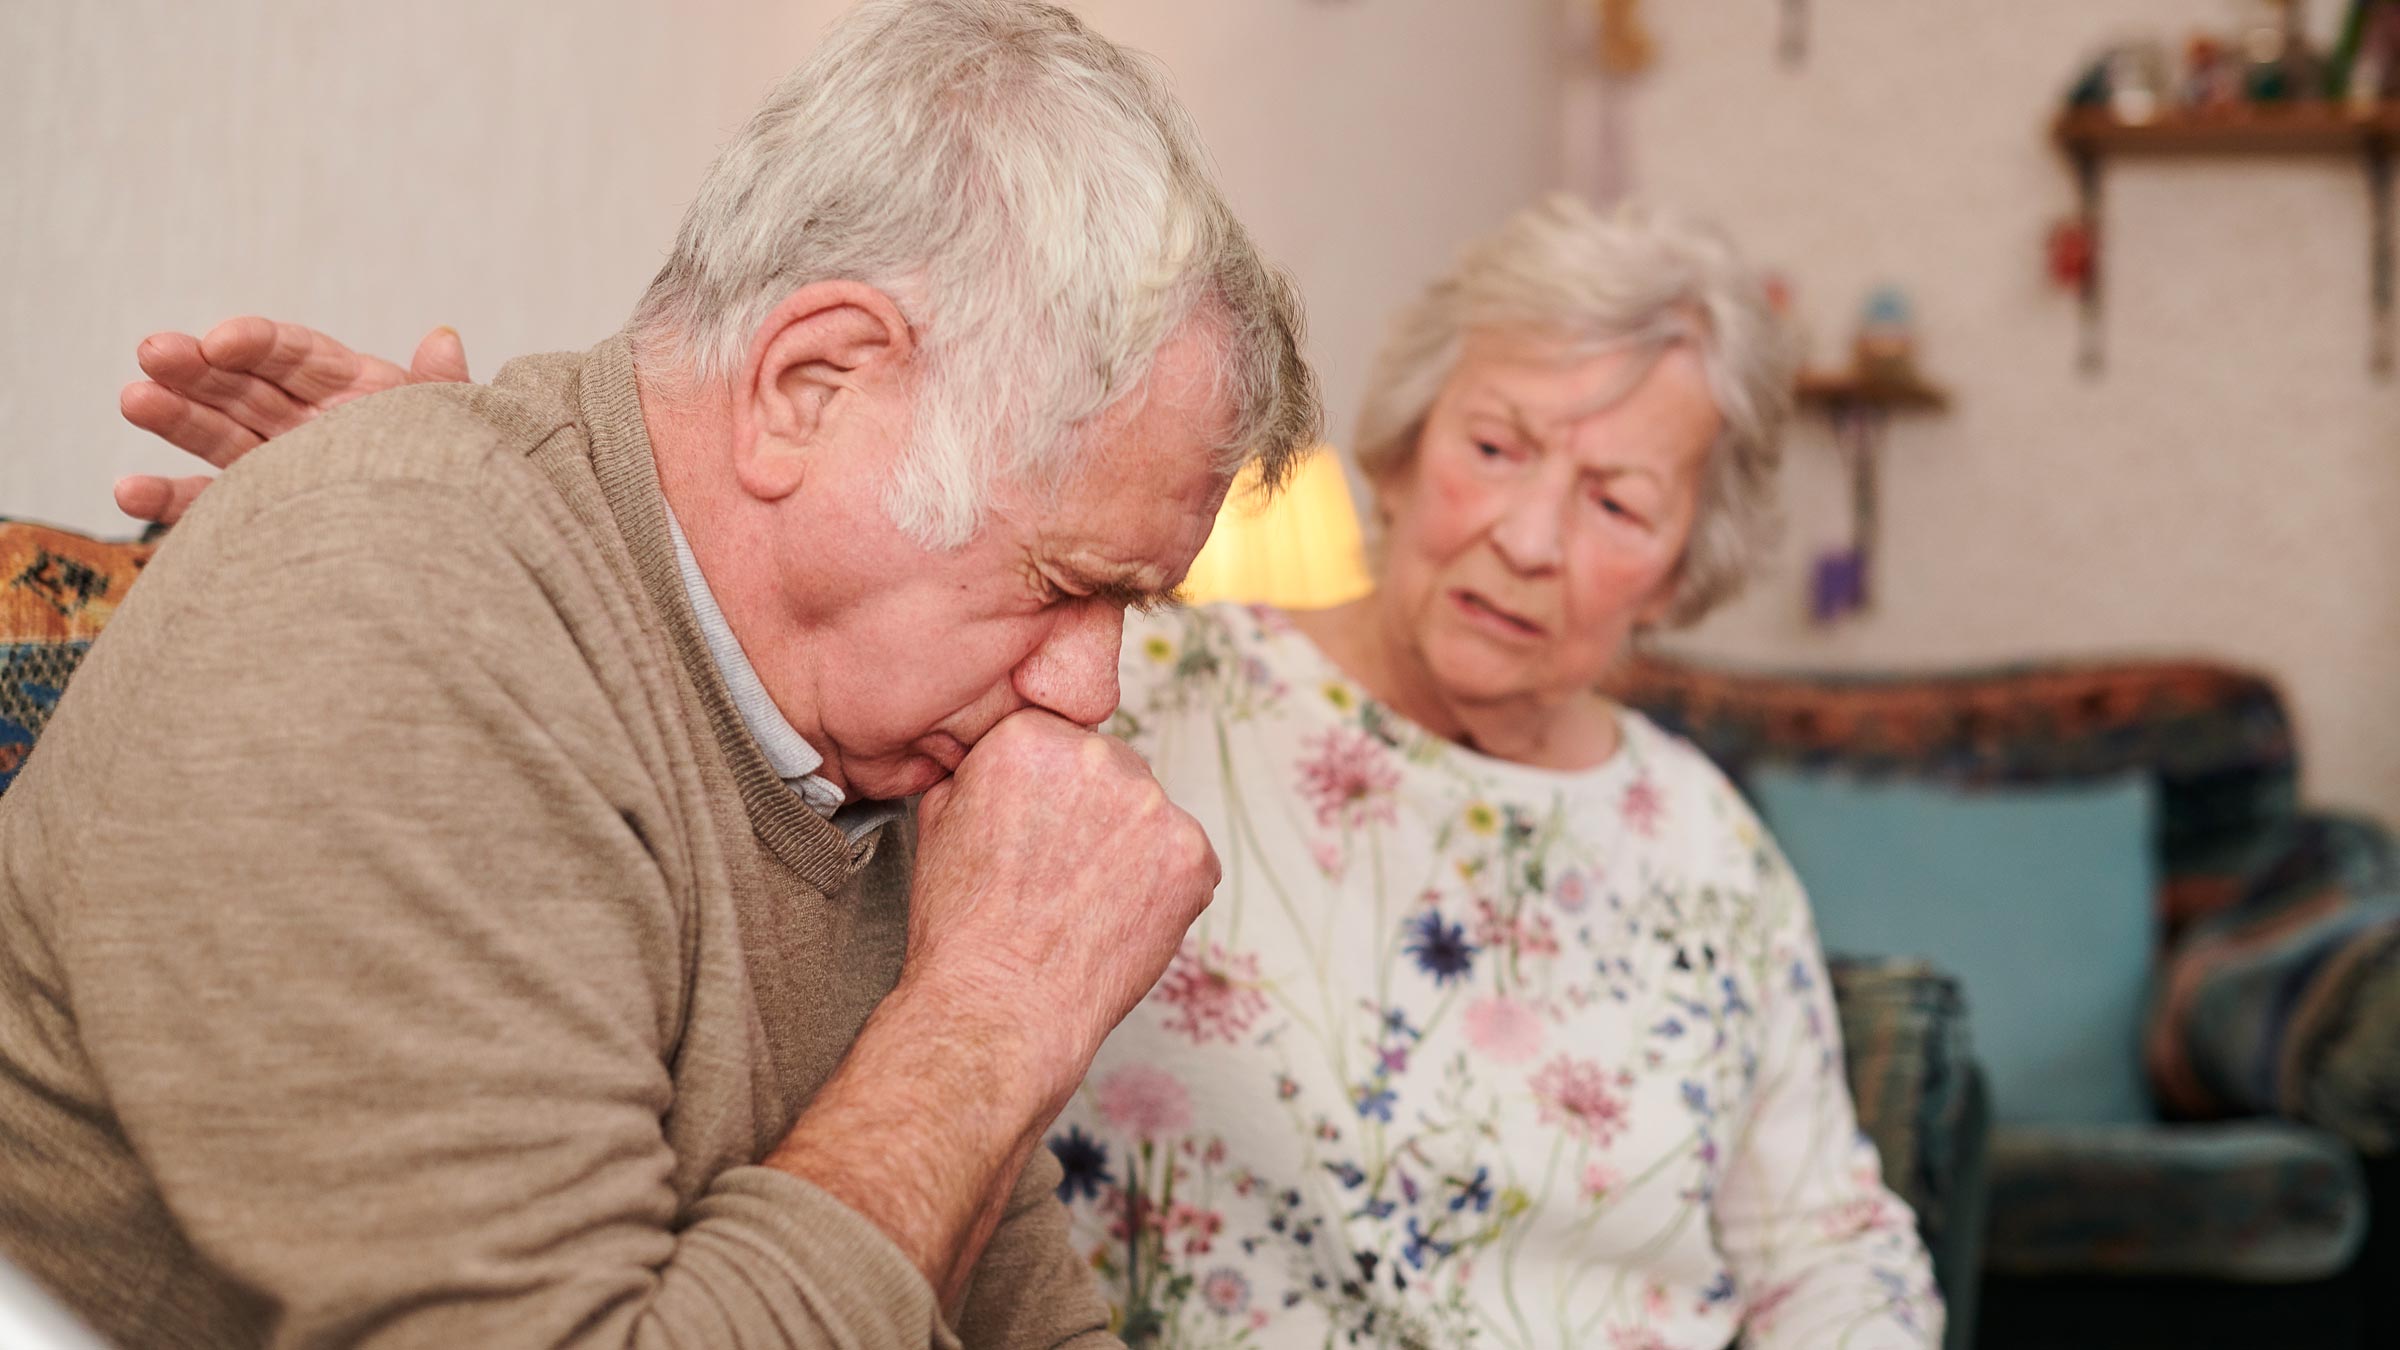 Senior man being comforted by his wife while coughing